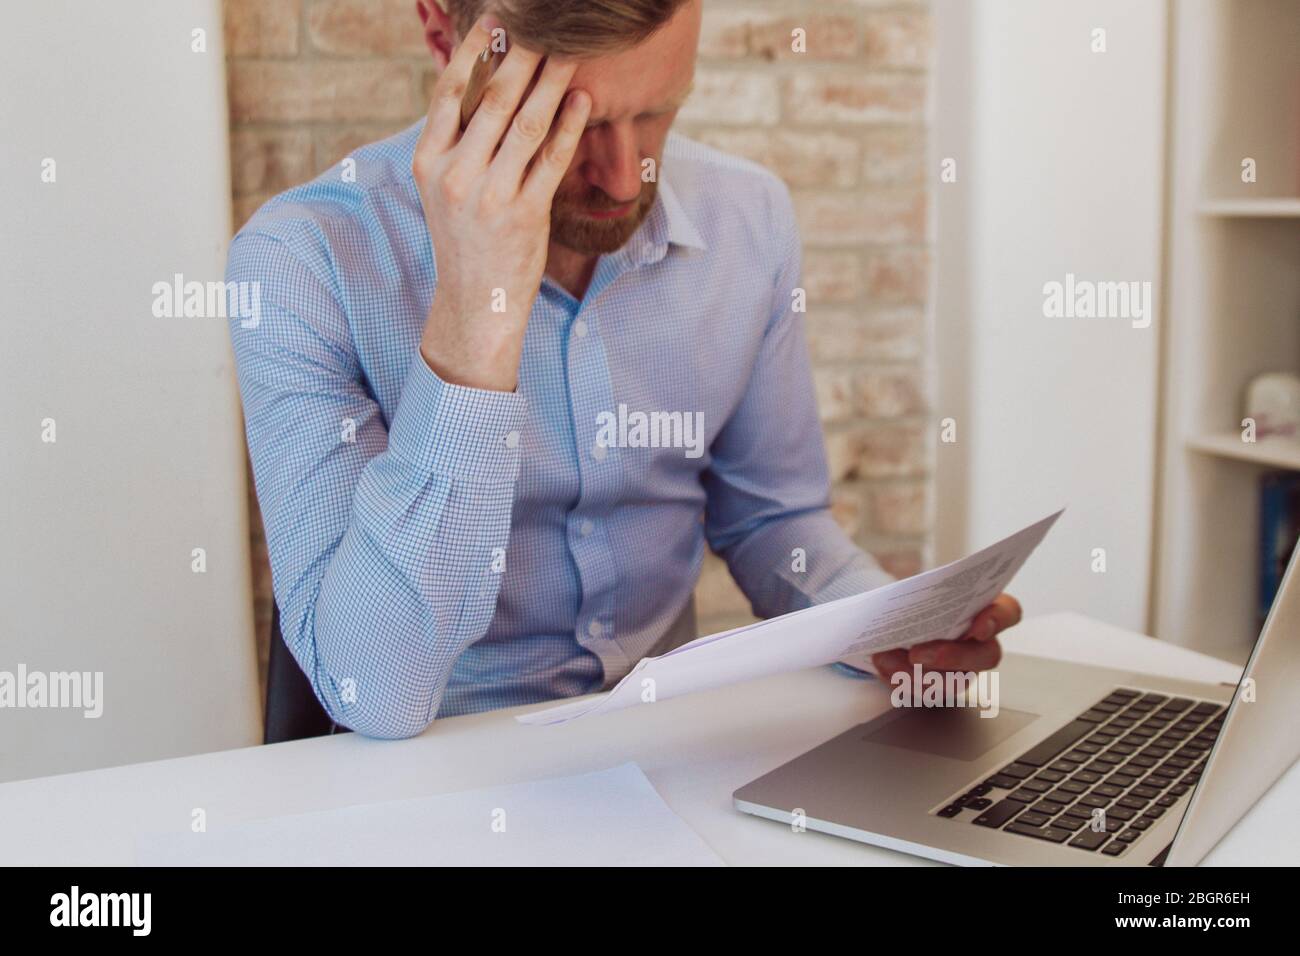 Man sitting at a desk with laptop and reading papers in light blue shirt. Light workspace, business space. Working environment. Brick wall background. Stock Photo